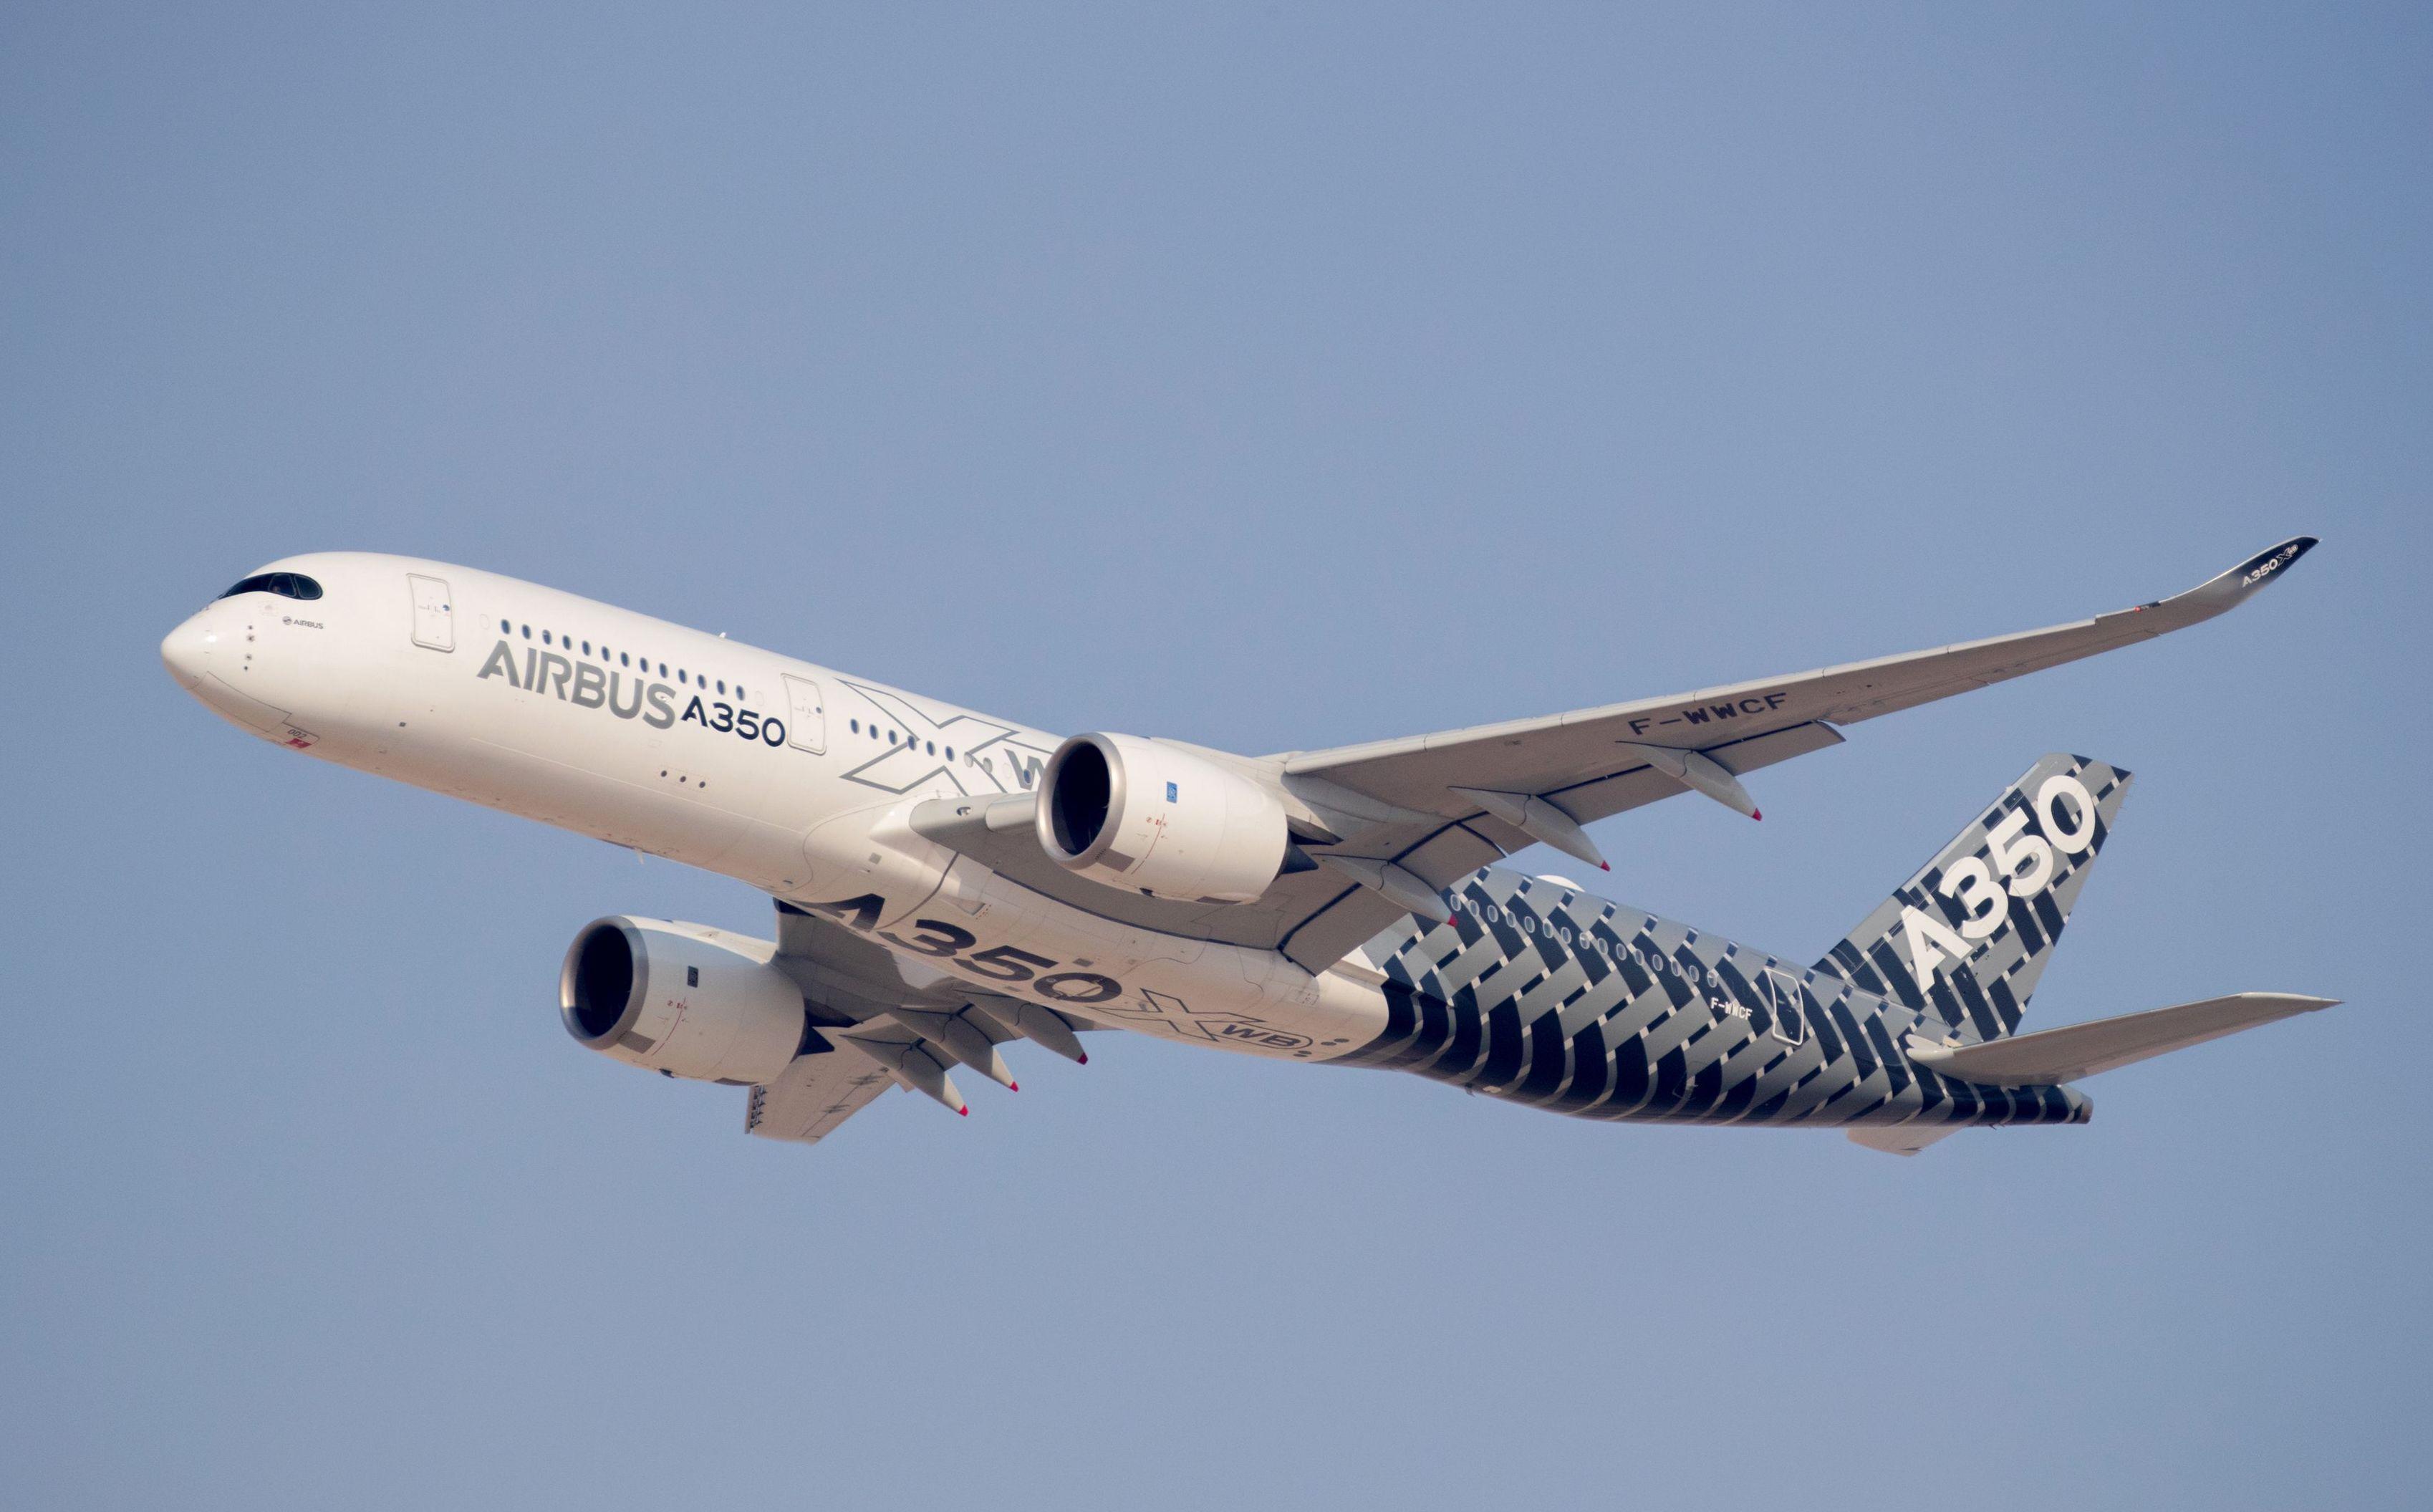 An Airbus A350 in flight.